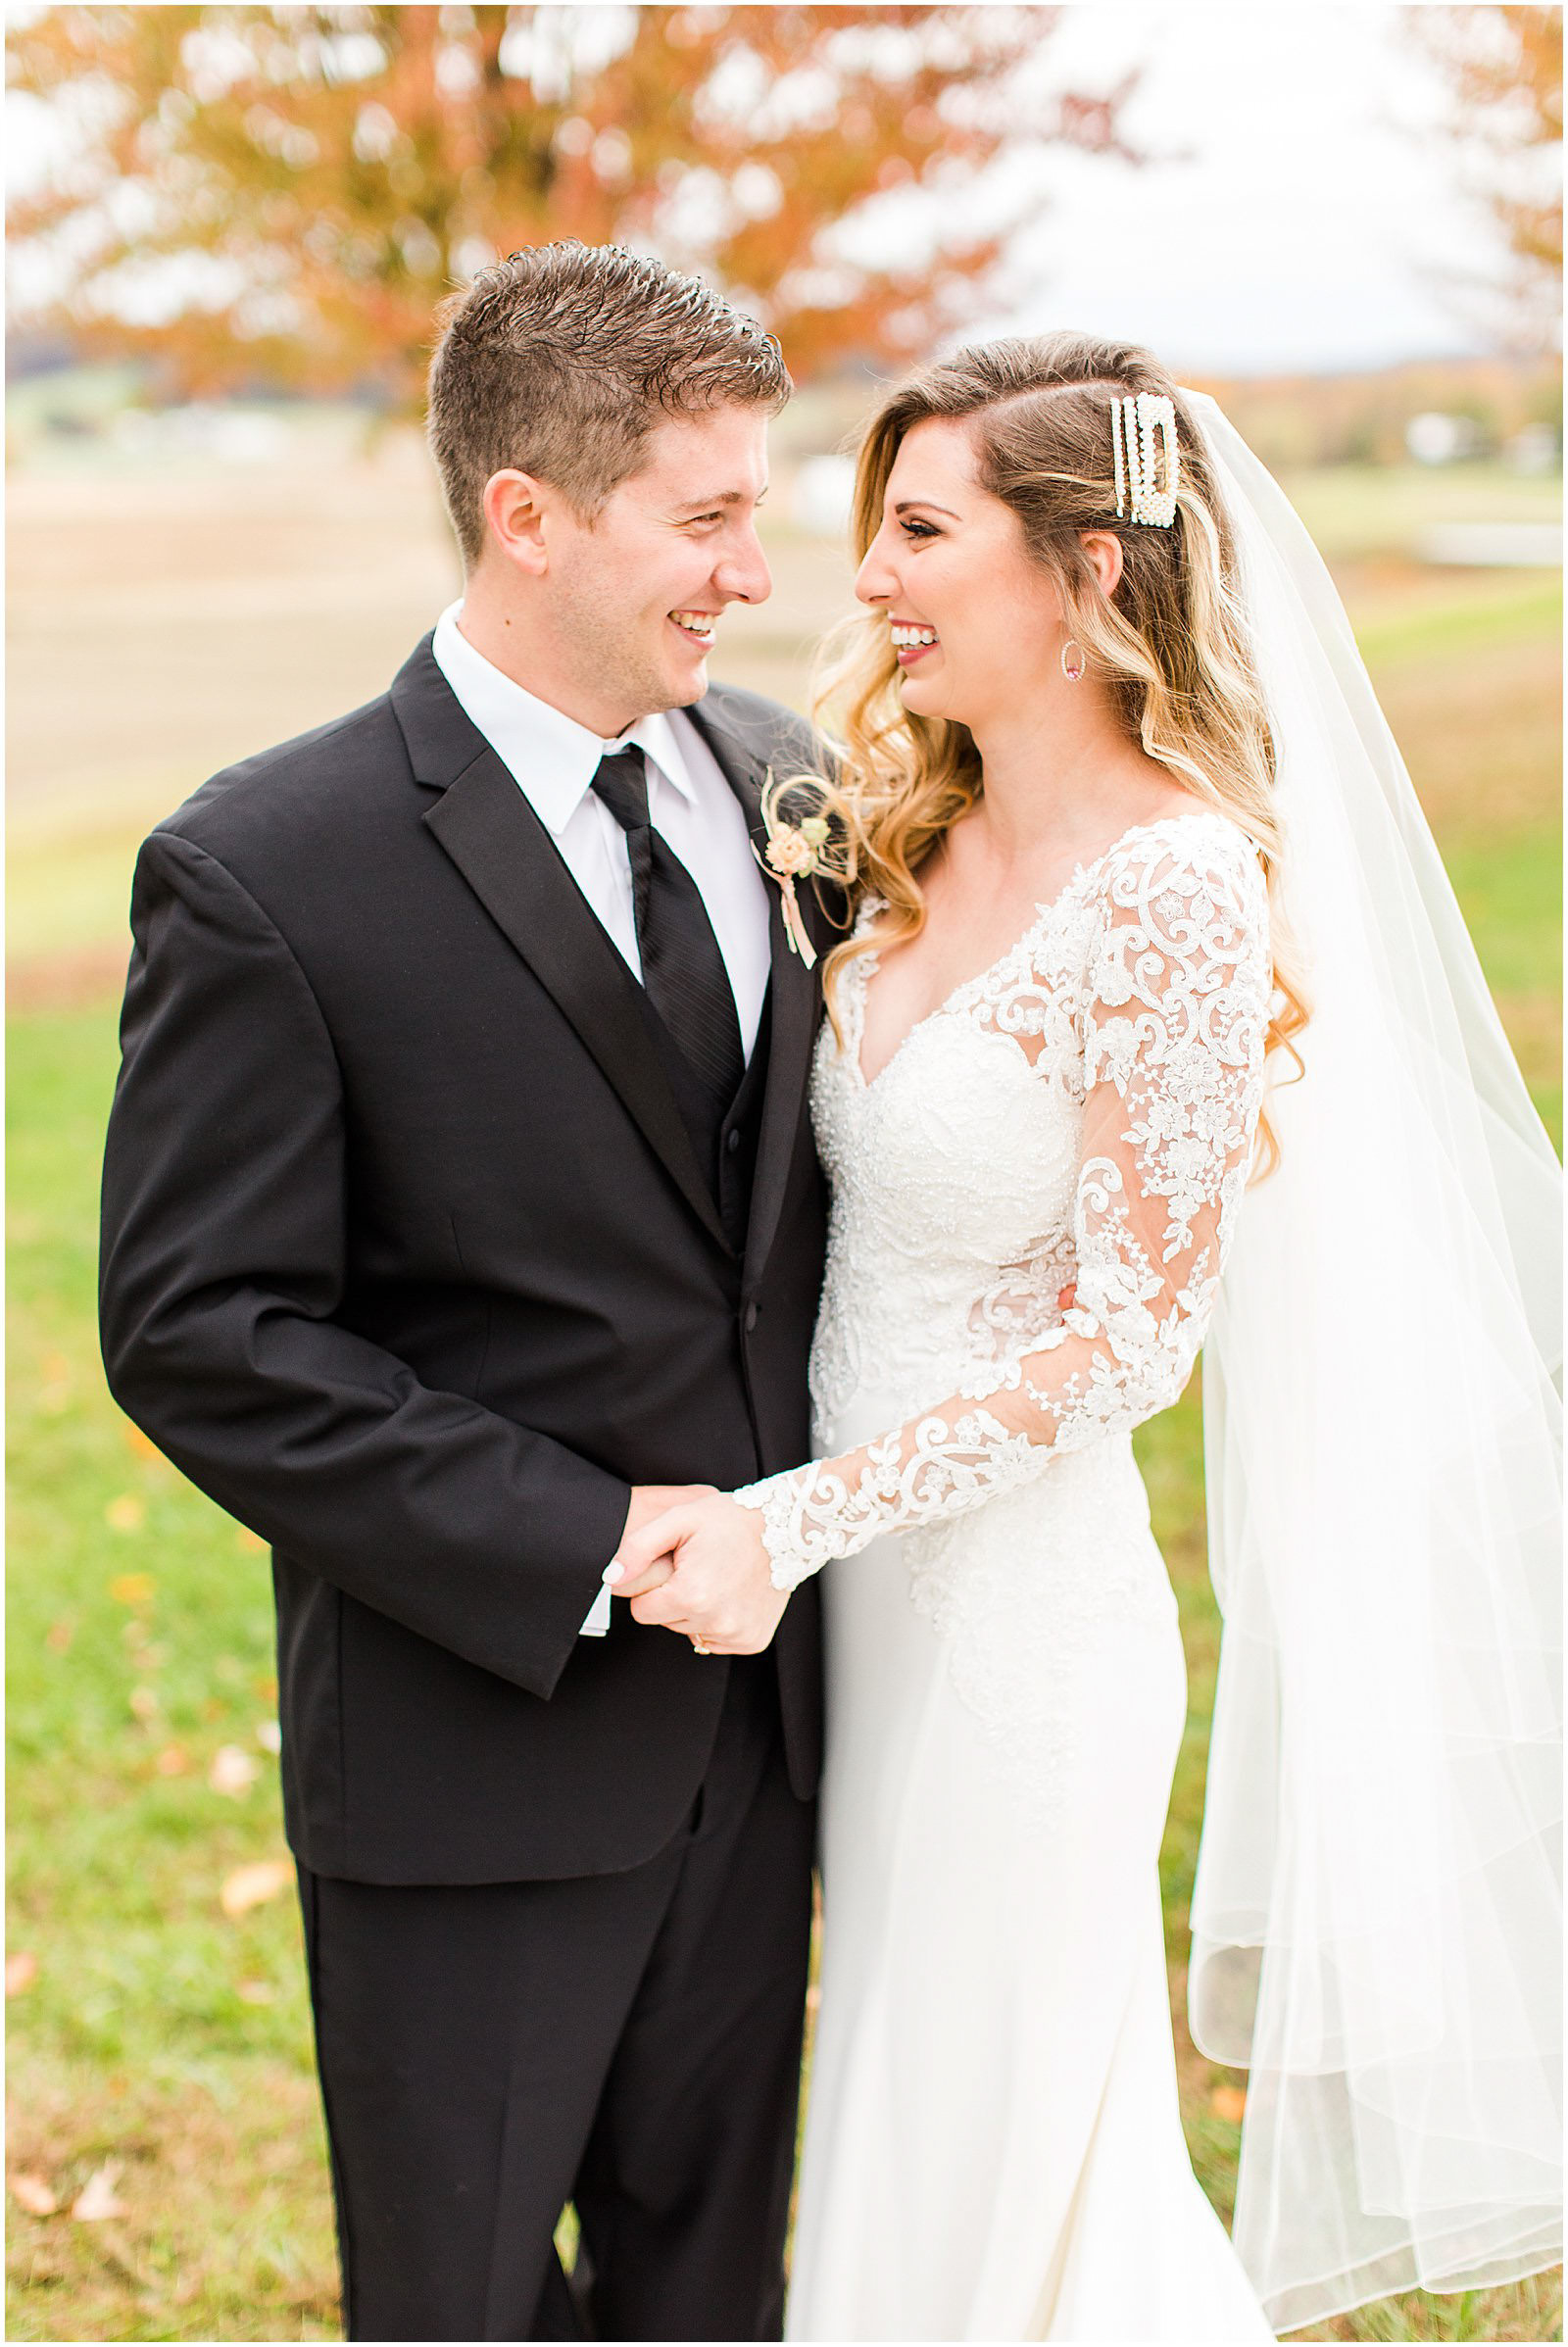 A Romantic Fall Wedding in Ferdinand, IN | Tori and Kyle | Bret and Brandie Photography 0055.jpg